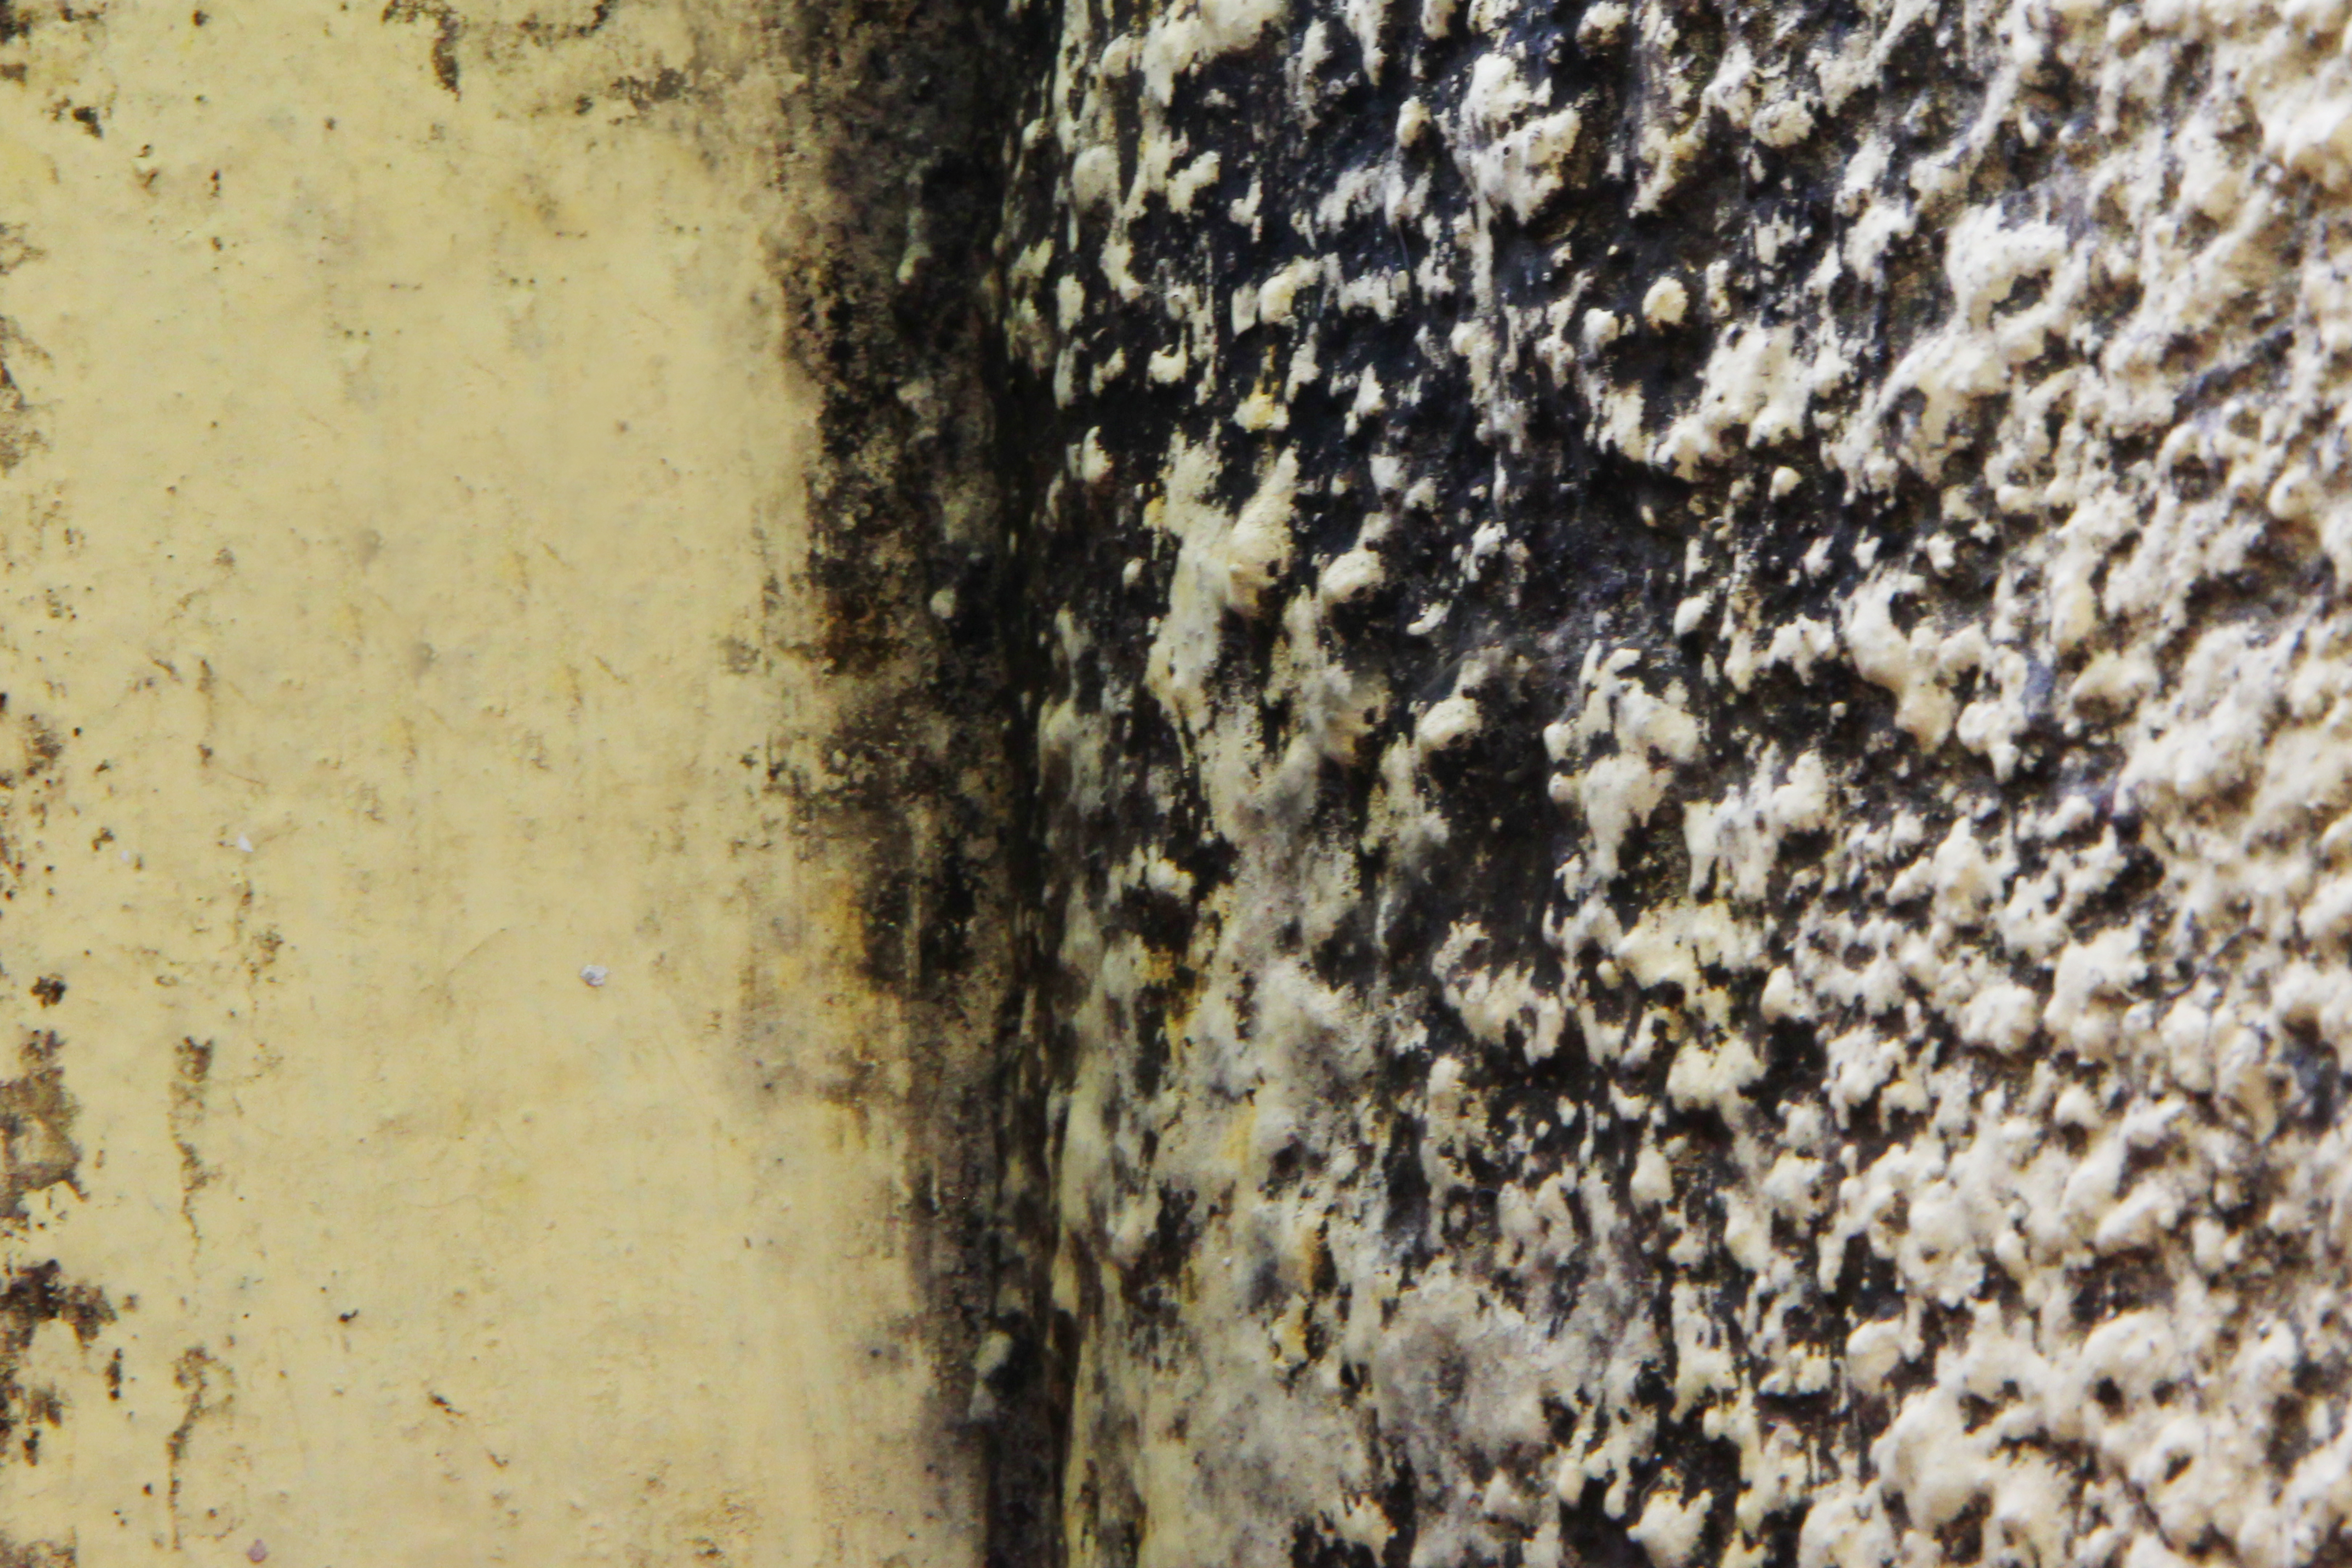 How to Prevent Mold Growth in Your Vacation Home: 10 Steps